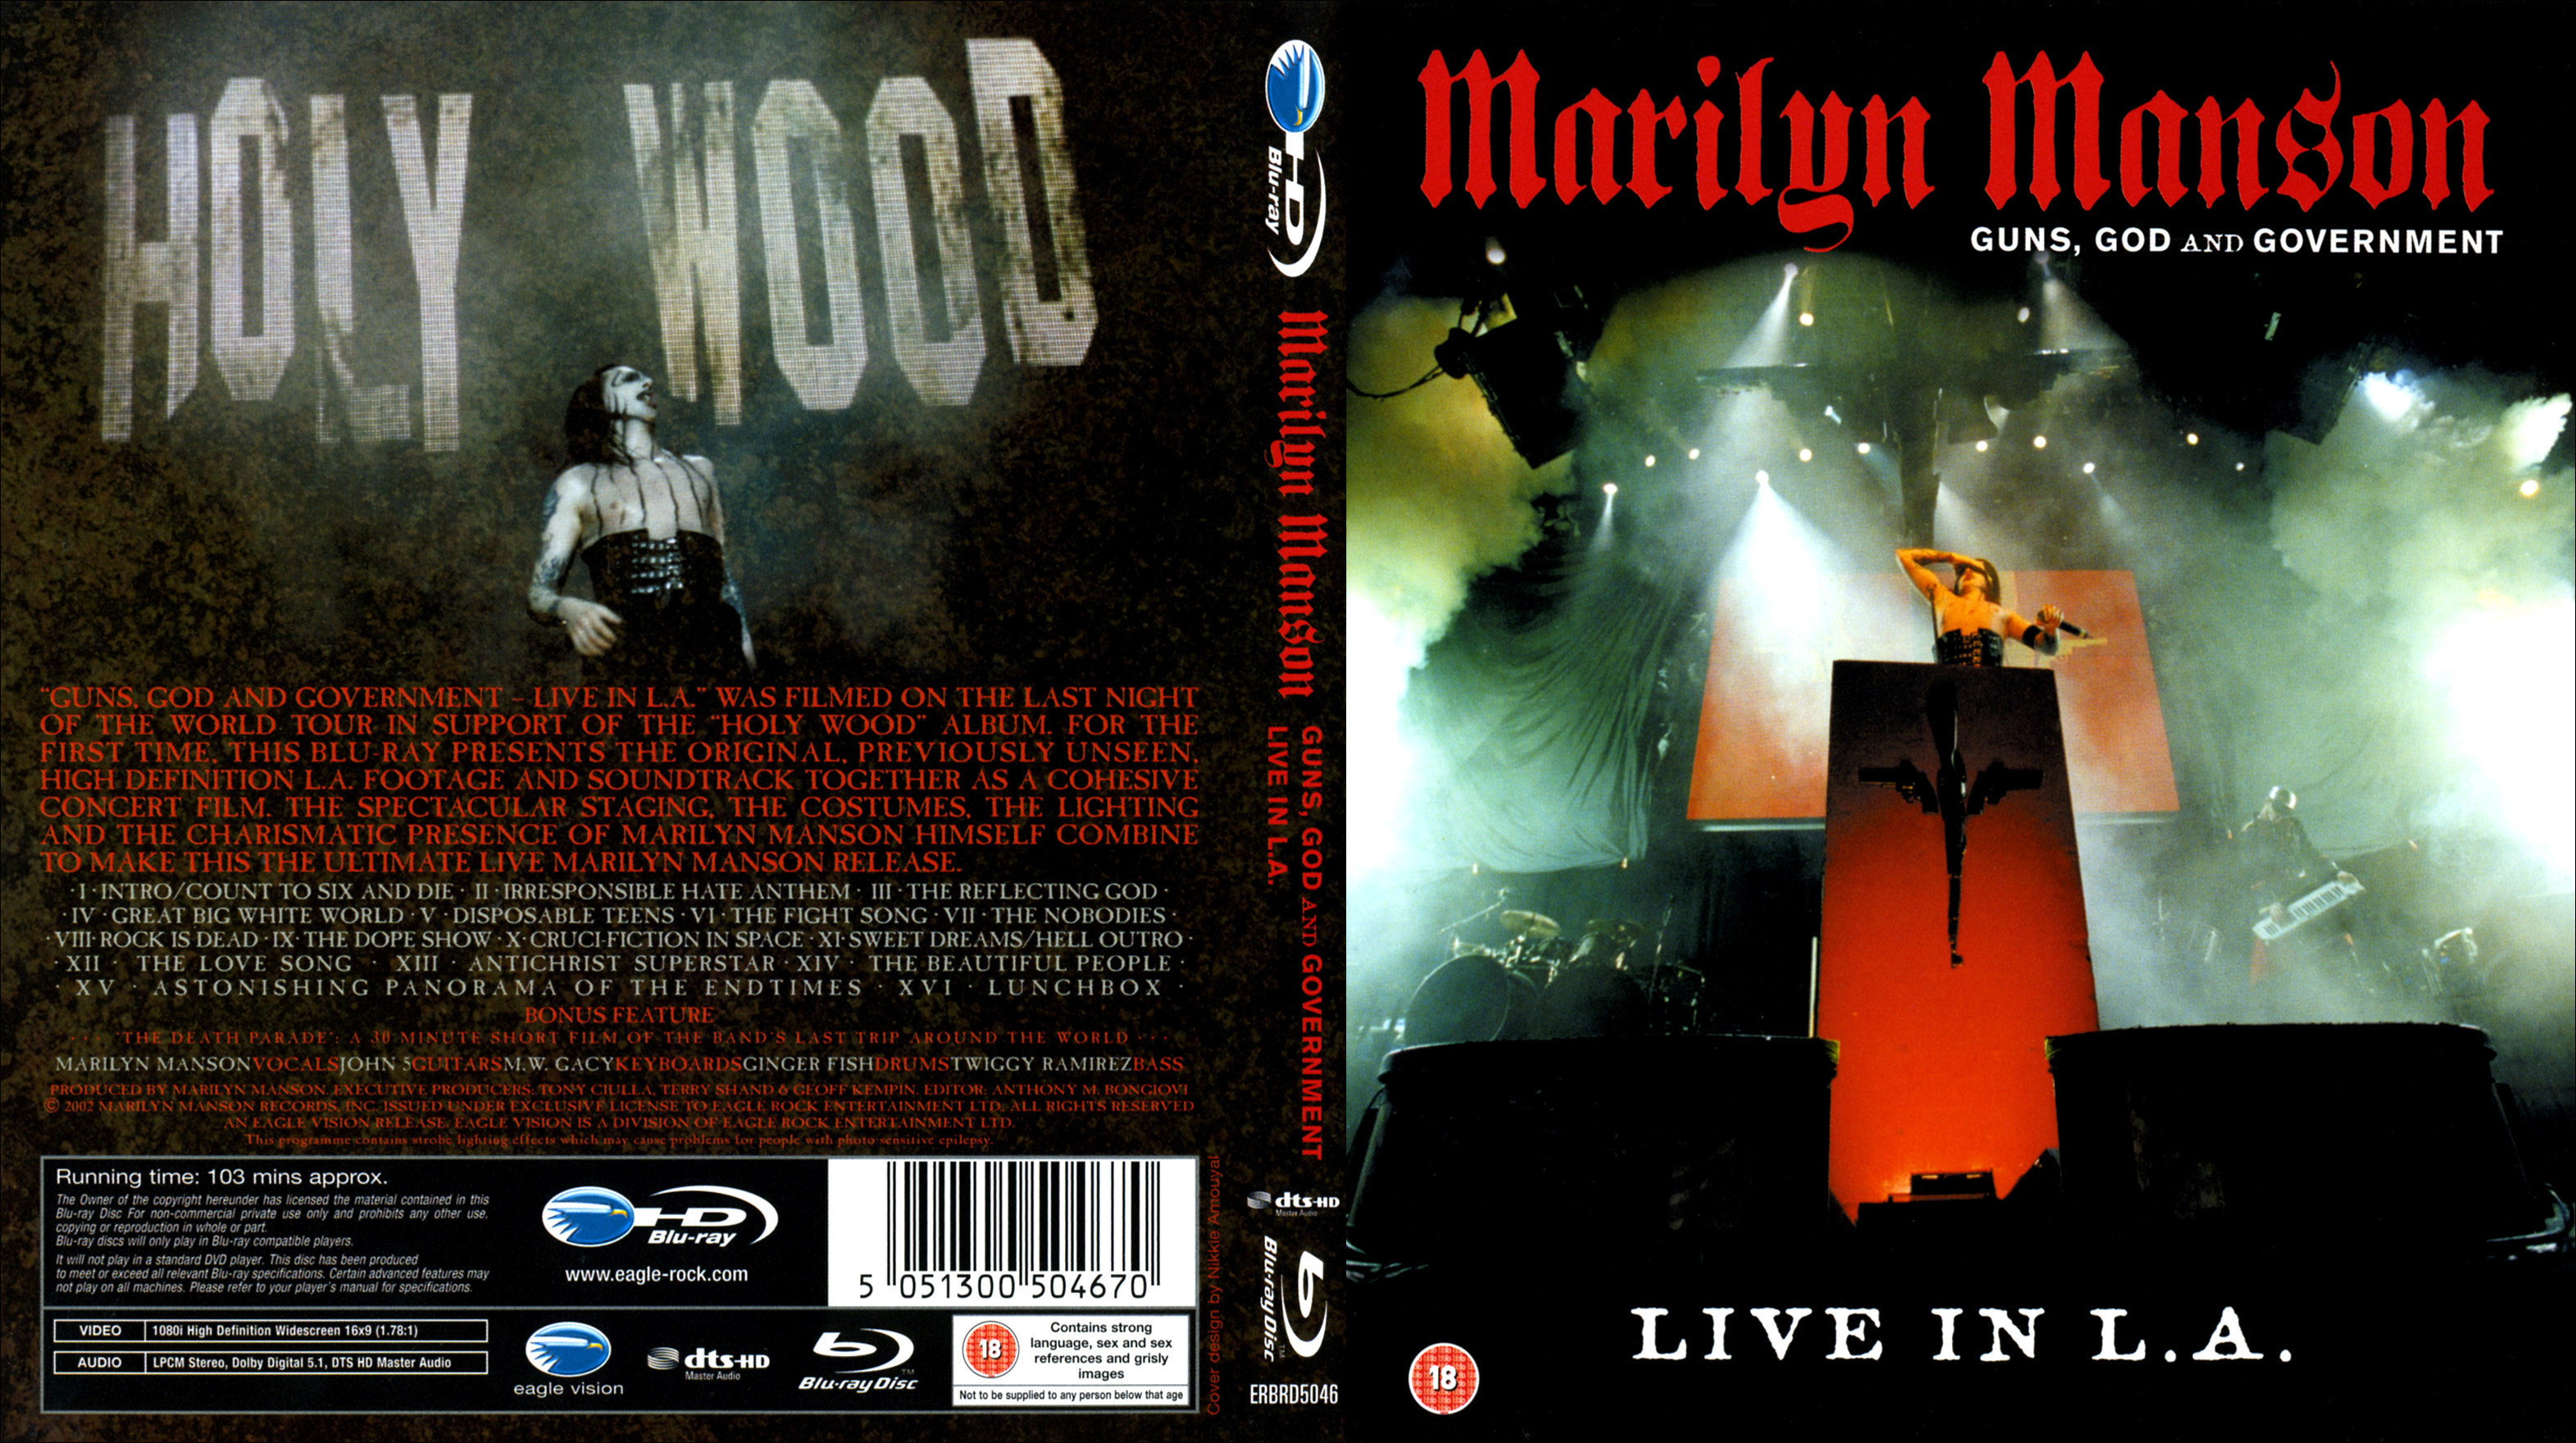 Jaquette DVD Marilyn Manson Guns, god and government  Live in LA (BLU-RAY)